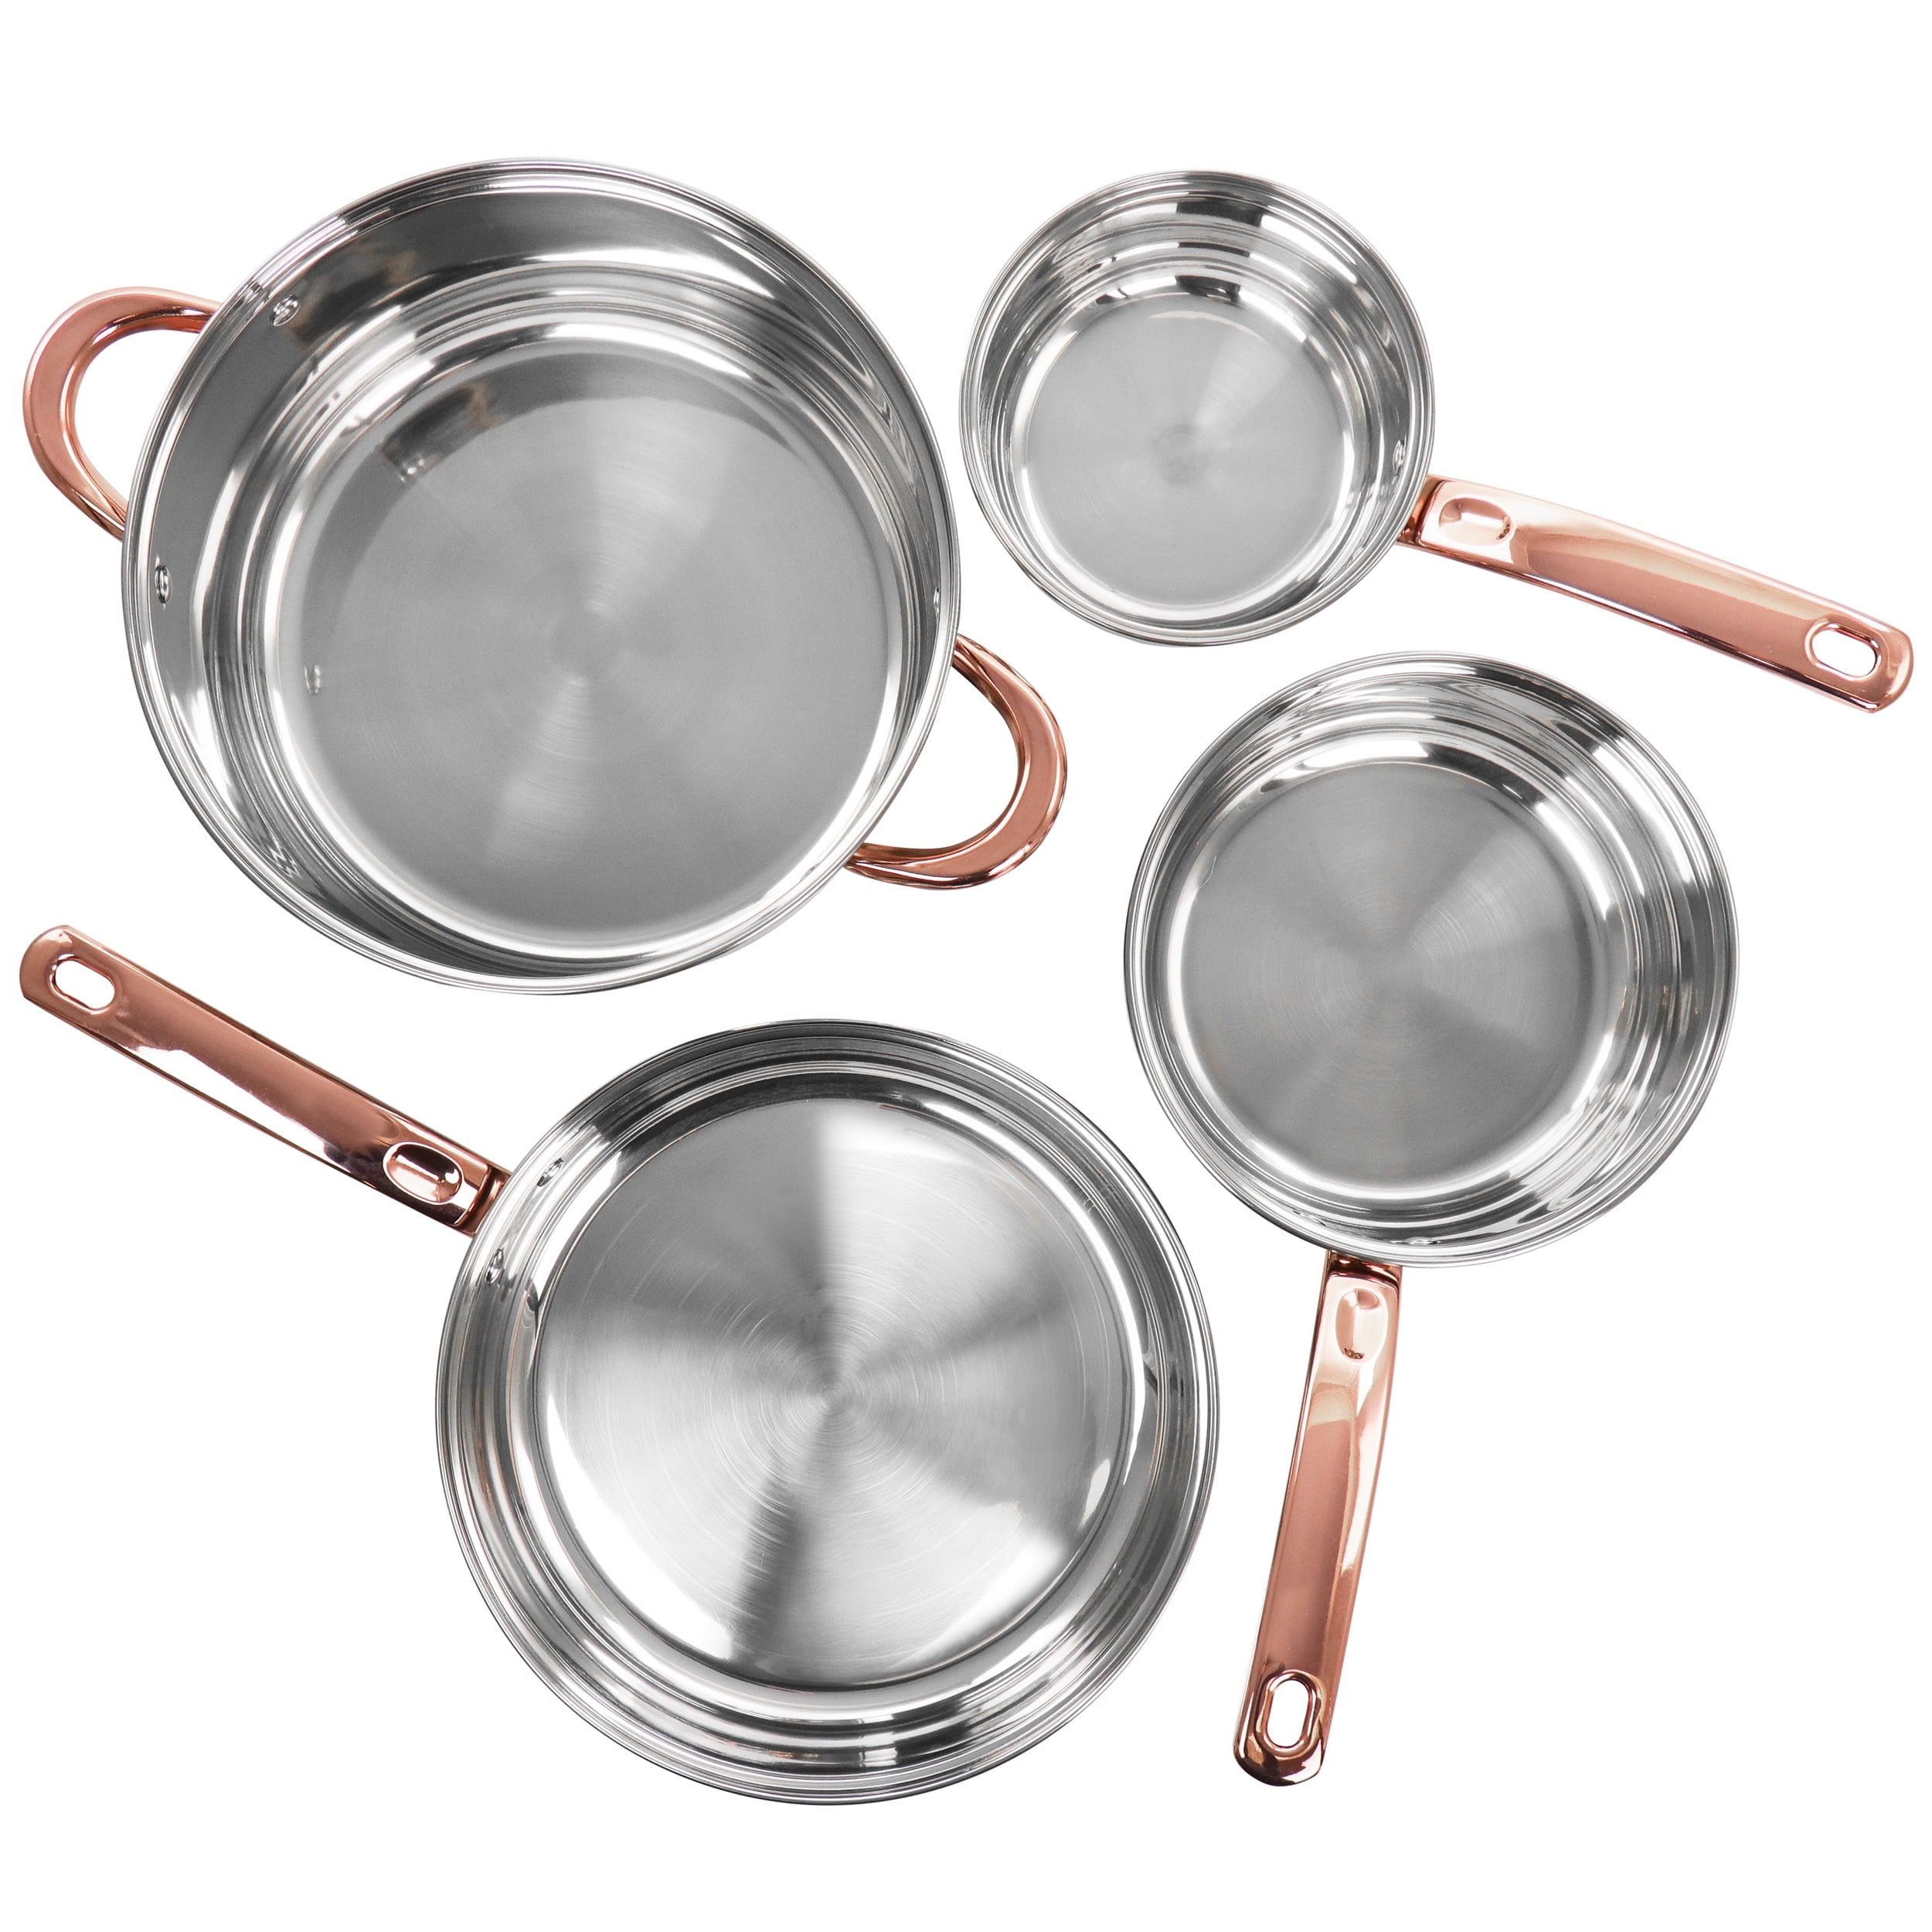 https://ak1.ostkcdn.com/images/products/is/images/direct/514b04acd663b1ba4b54913ca564aae5aa1f9e44/Gibson-Home-Ansonville-8-Piece-Stainless-Steel-Cookware-Set-with-Rose-Gold-Handles.jpg